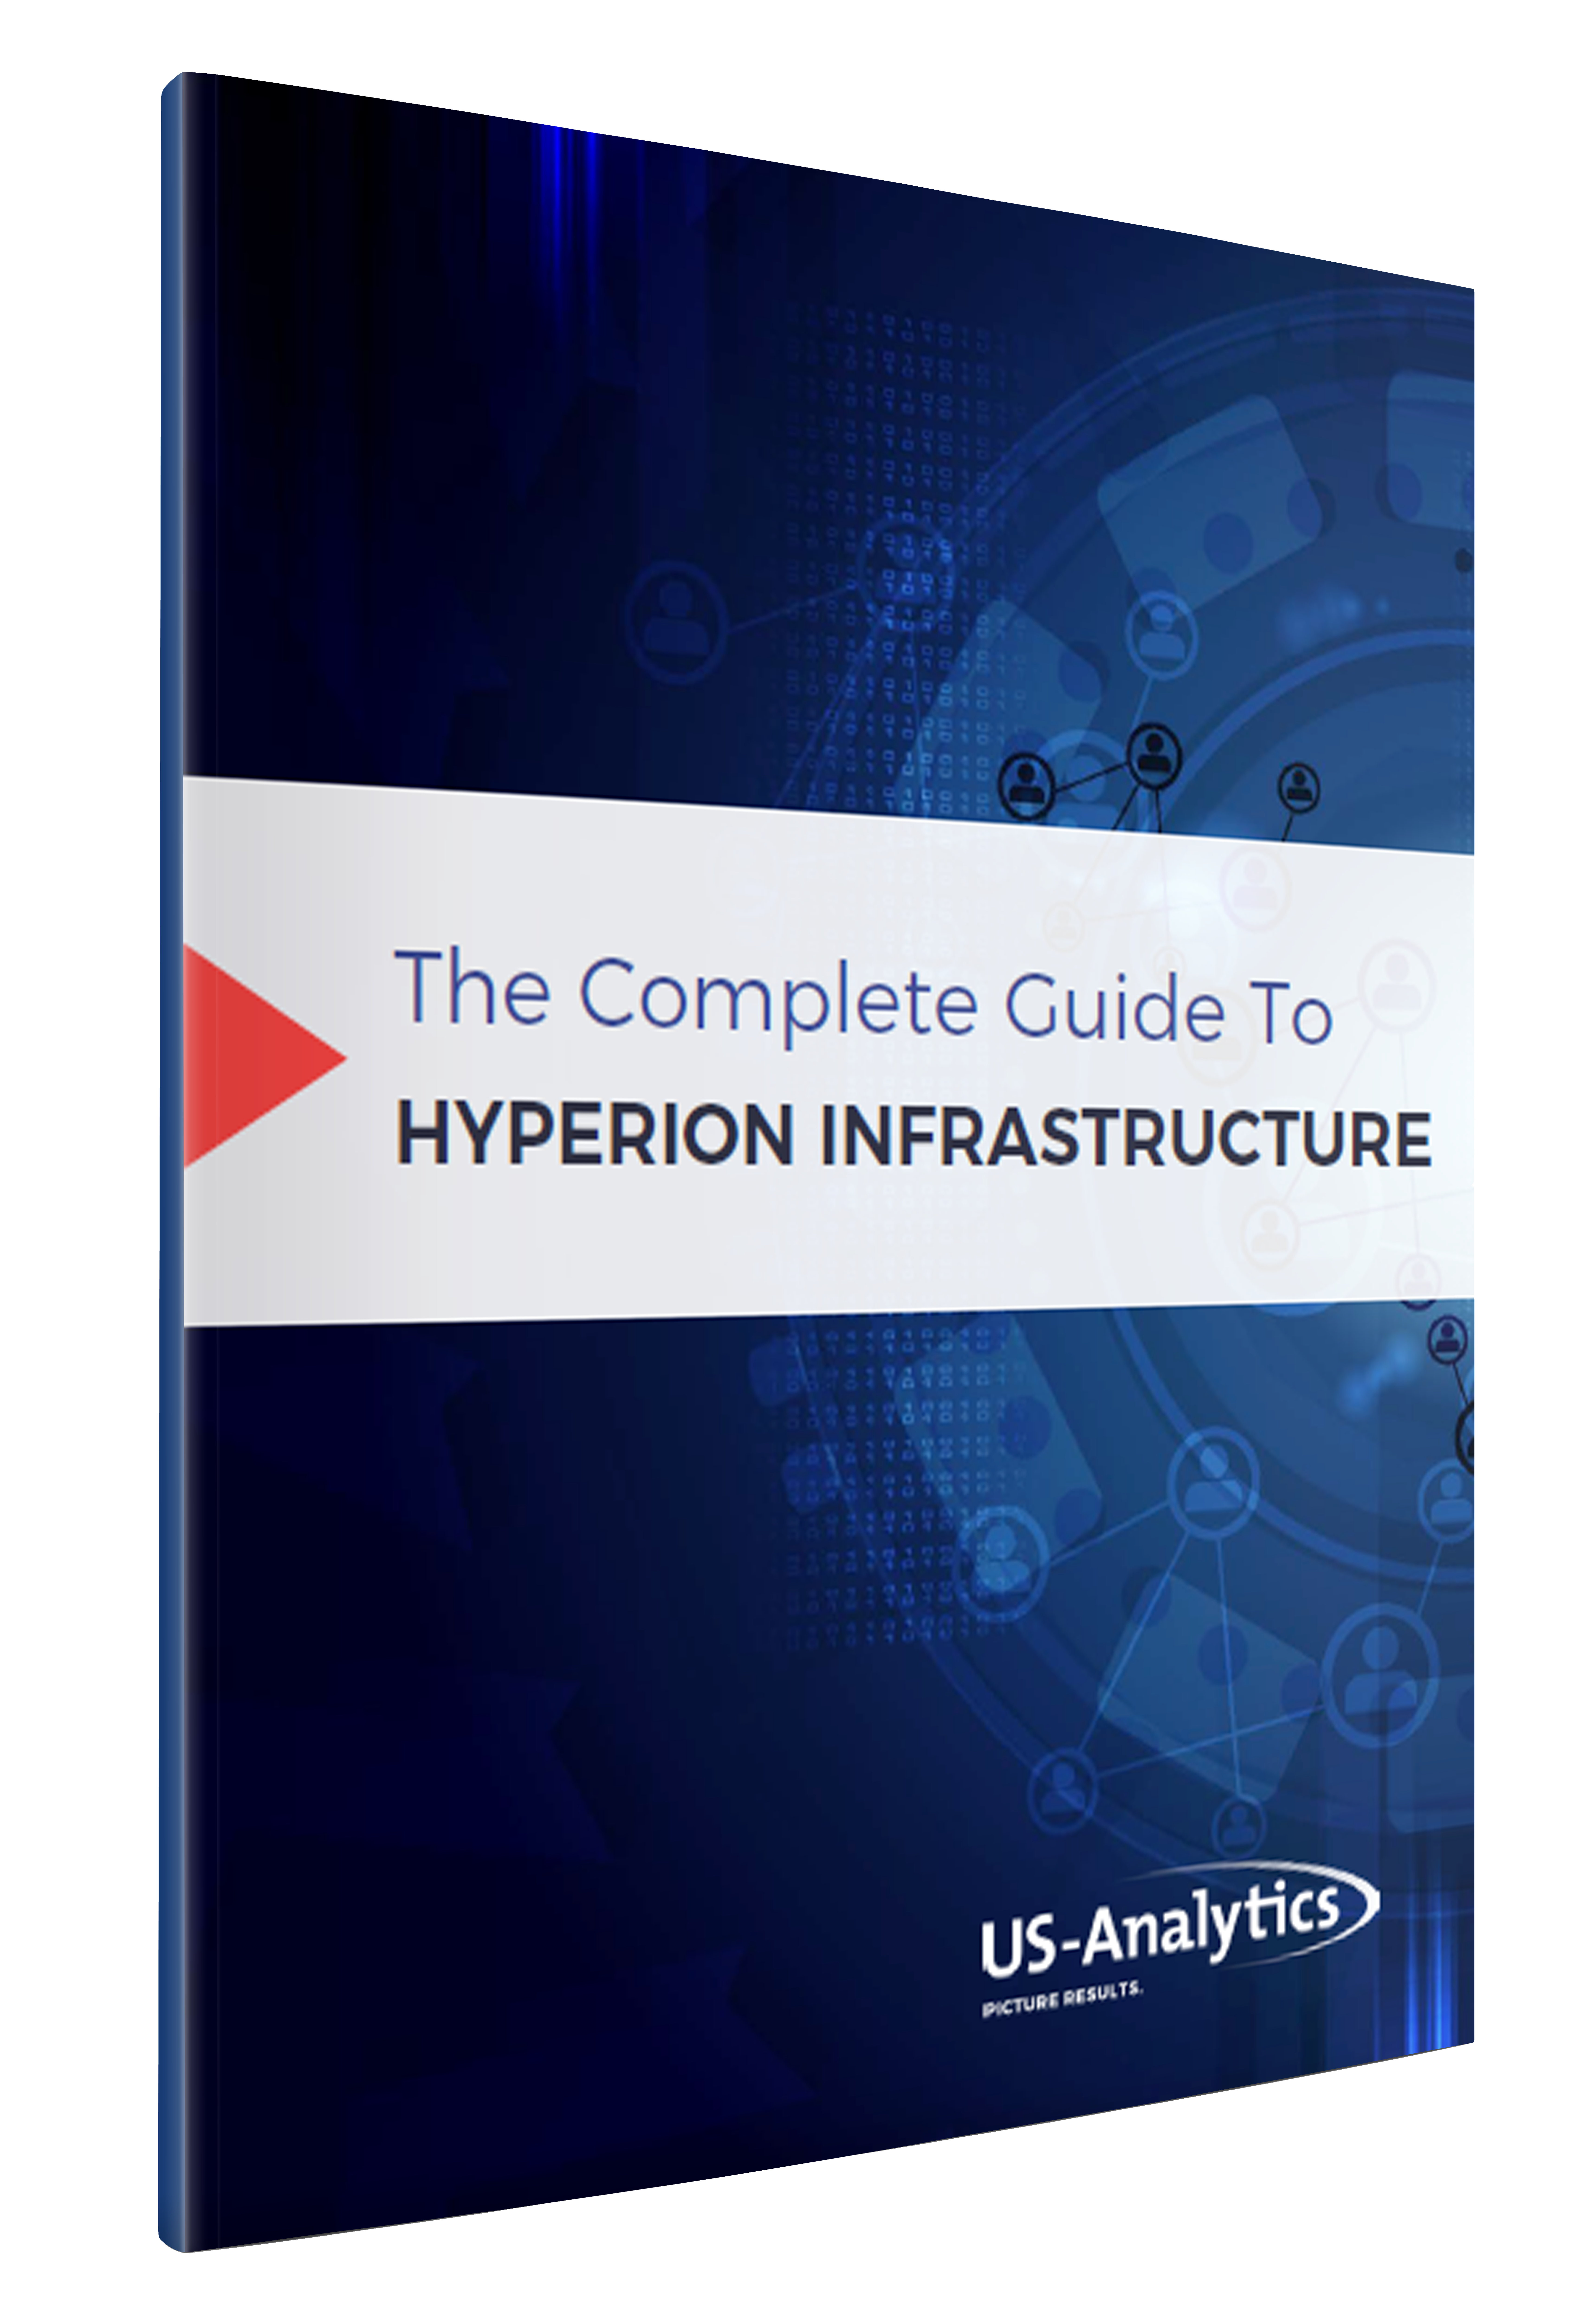 the complete guide to hyperion infrastructure_landing page (1)